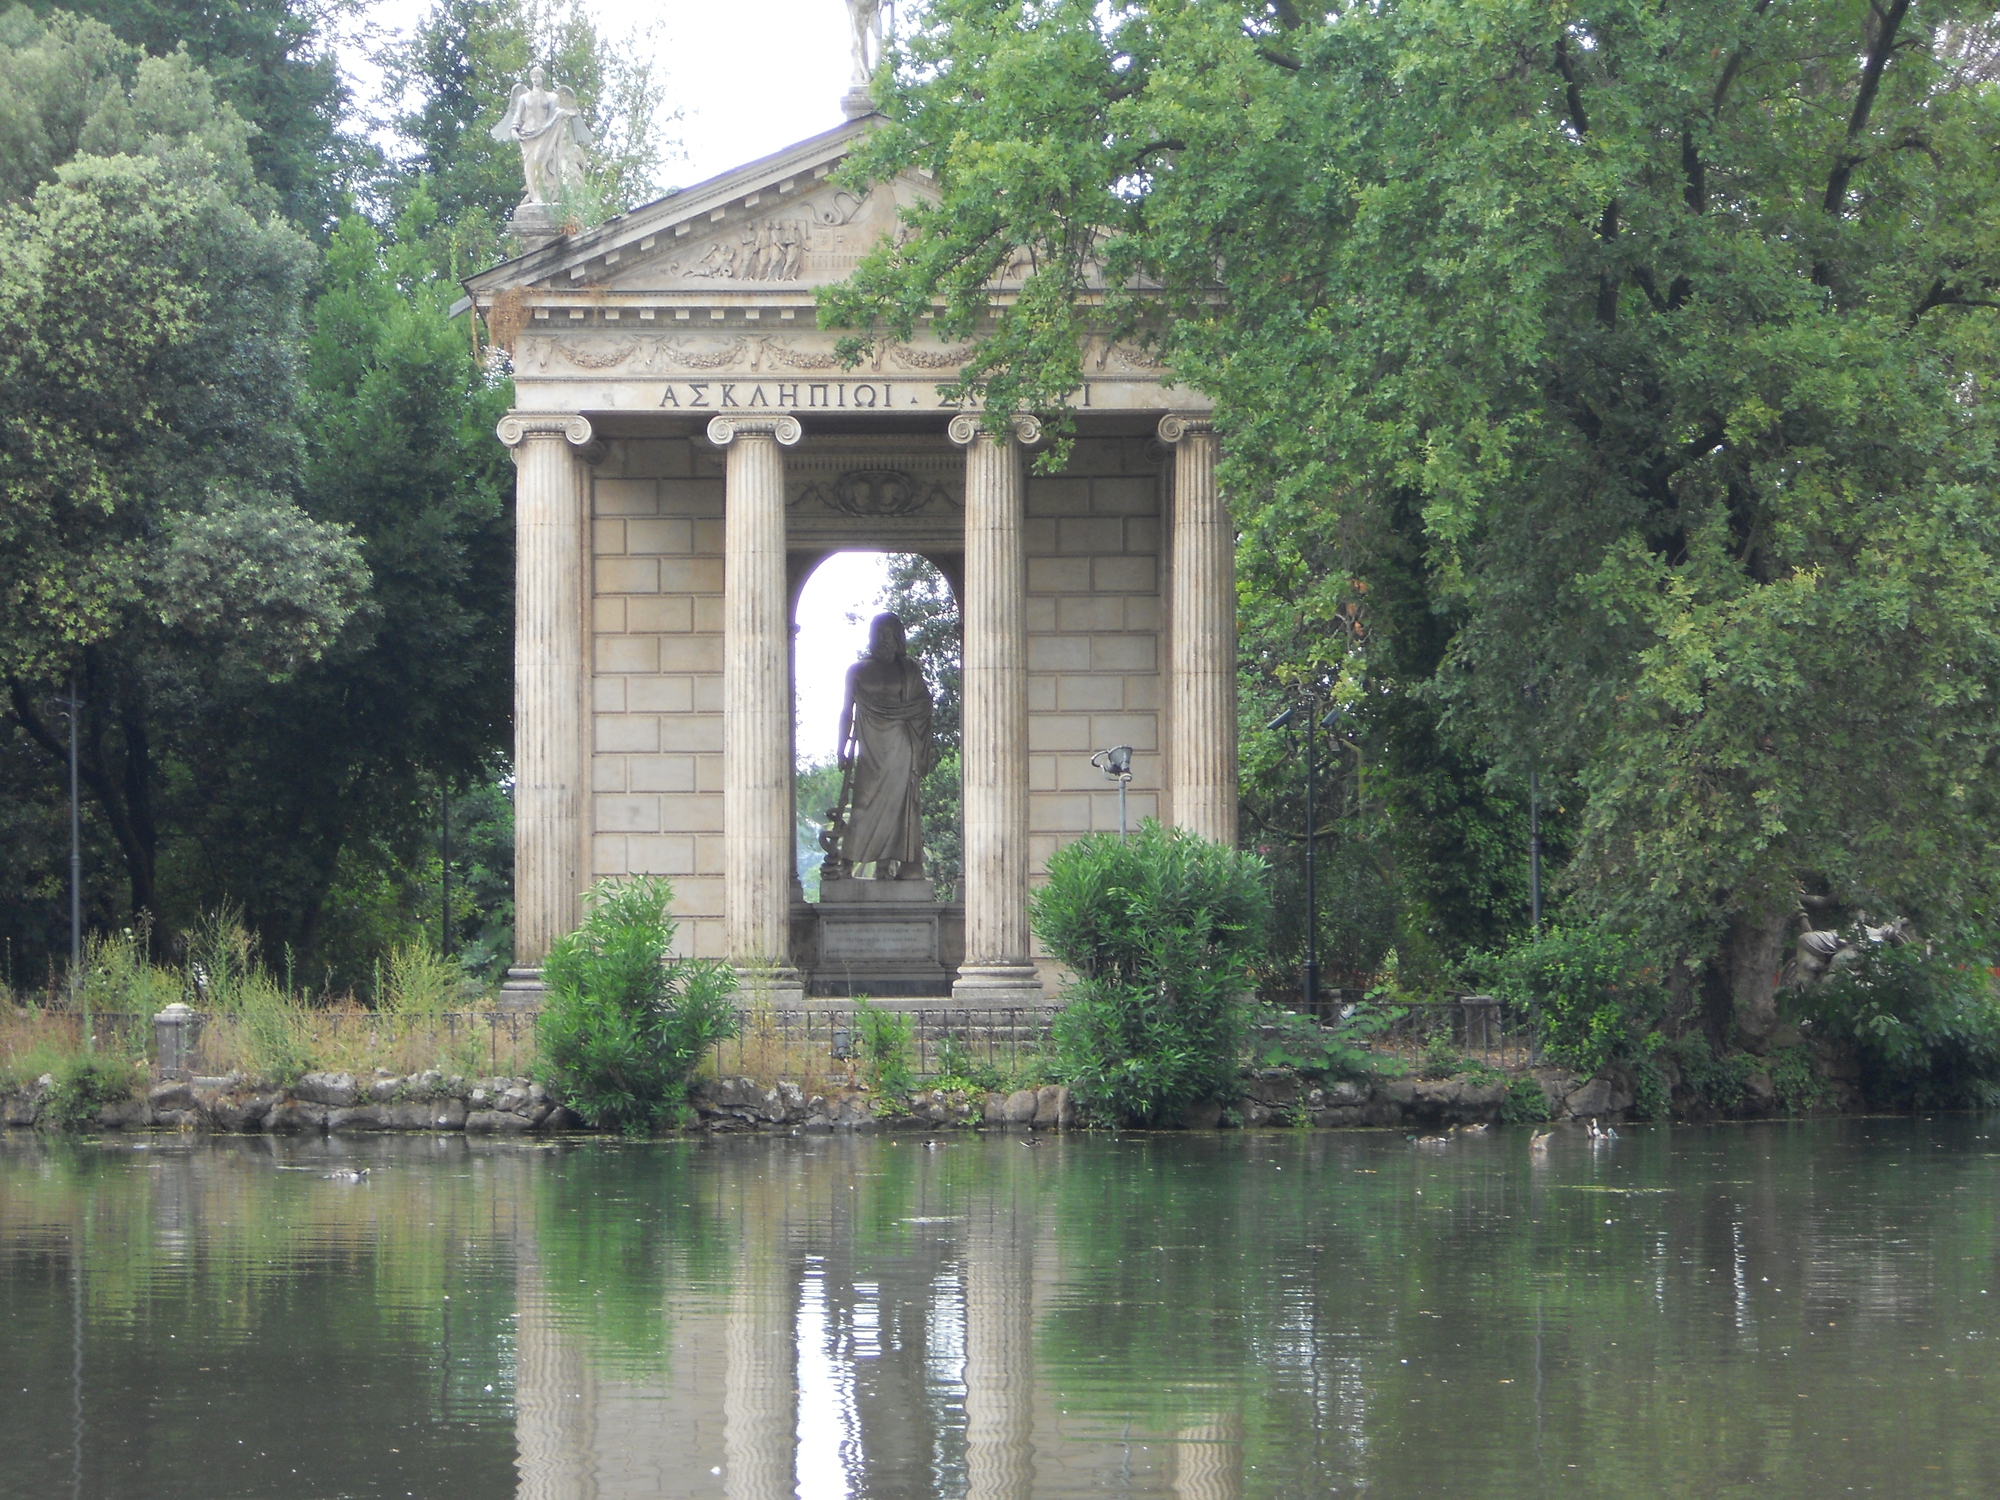 Temple of Aesculapius, Borghese Gardens, Rome, Italy